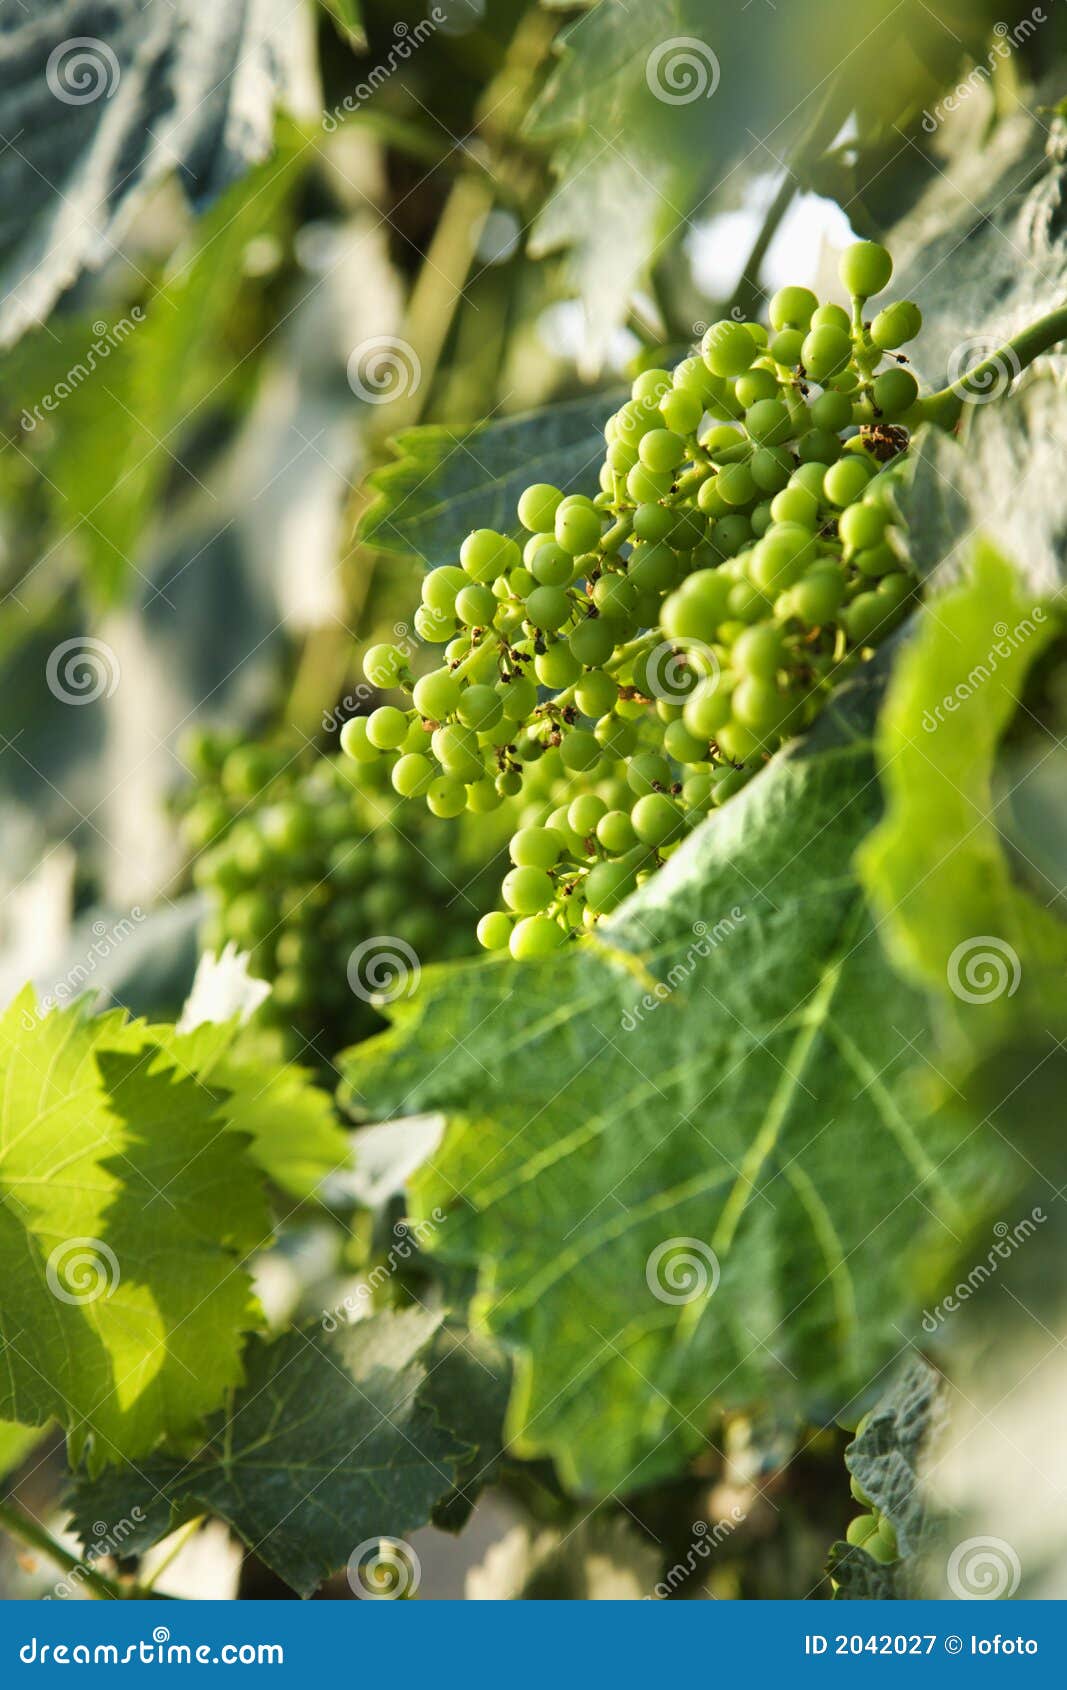 green grape clusters in tuscany, italy.